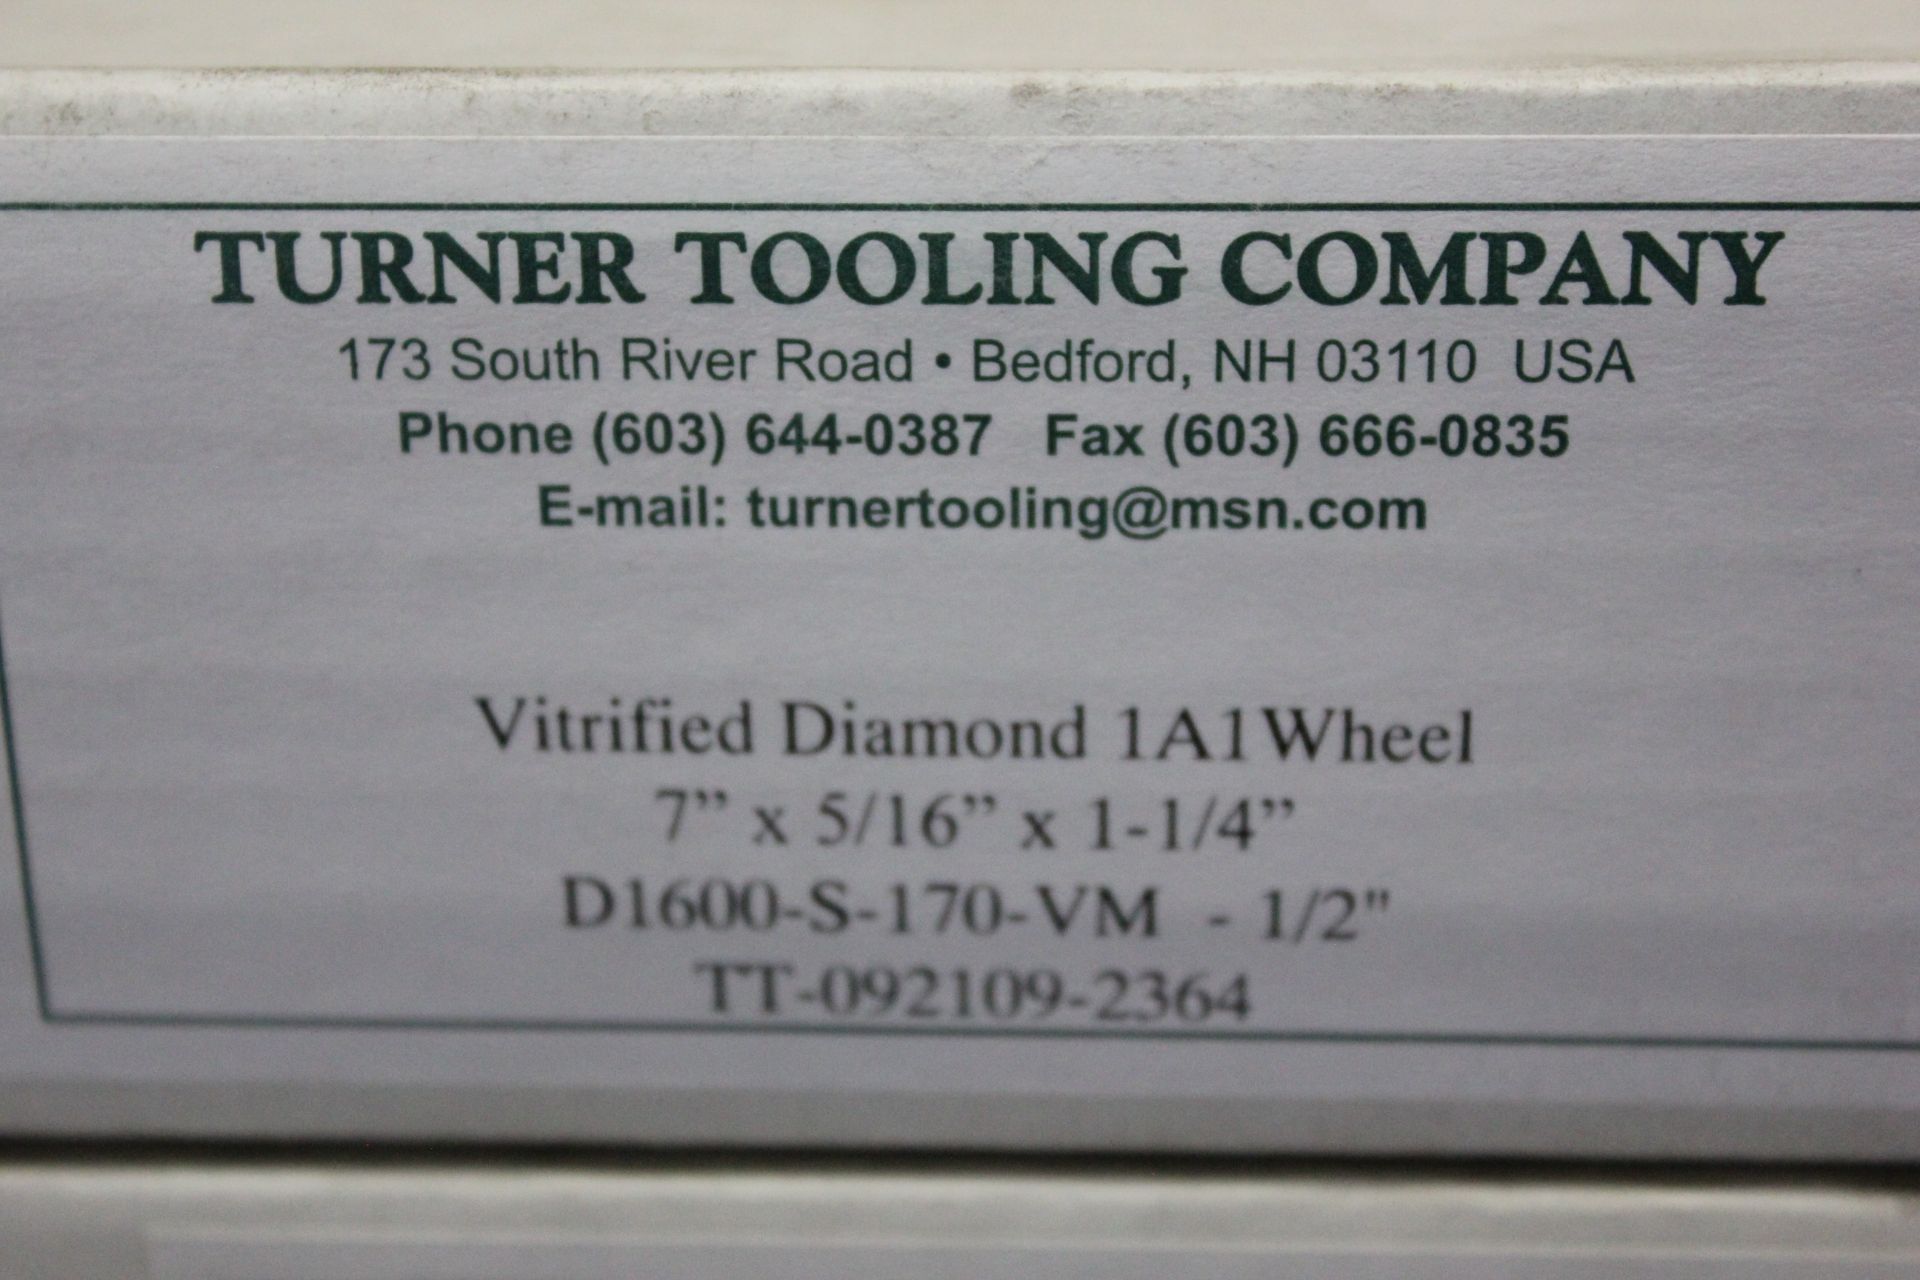 LOT OF 5 NEW TURNER TOOLING VITRIFIED DIAMOND 1A1 GRINDING WHEELS - Image 4 of 7